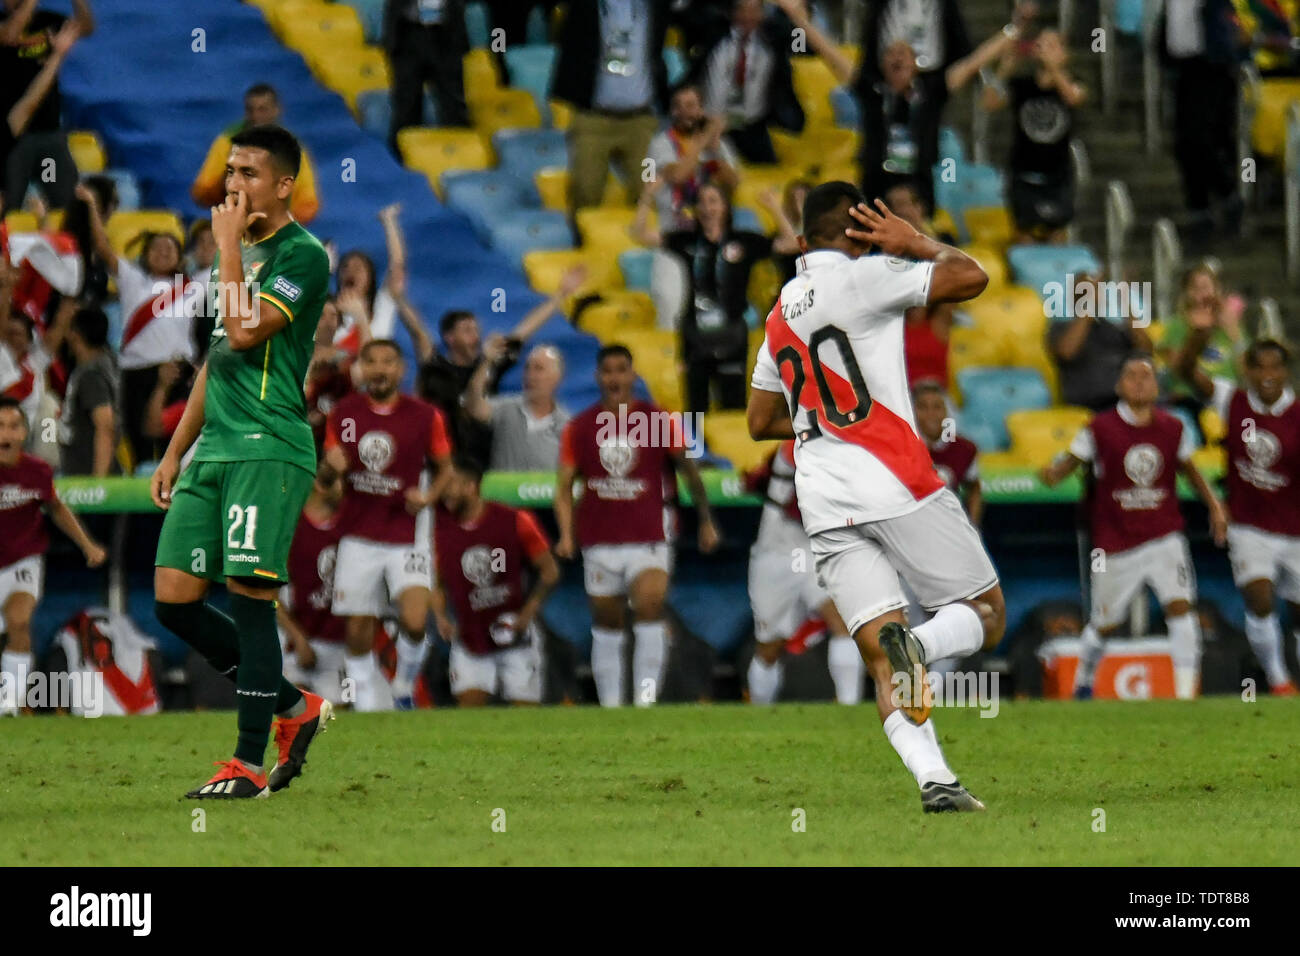 Rio De Janeiro, Brazil. 18th June, 2019. Edison Flores marks the third Peruvian goal during a match between Bolivia and Peru, valid for the group stage of the Copa America 2019, held on Tuesday (18) at the Maracanã Stadium in Rio de Janeiro, RJ. Credit: Nayra Halm/FotoArena/Alamy Live News Stock Photo